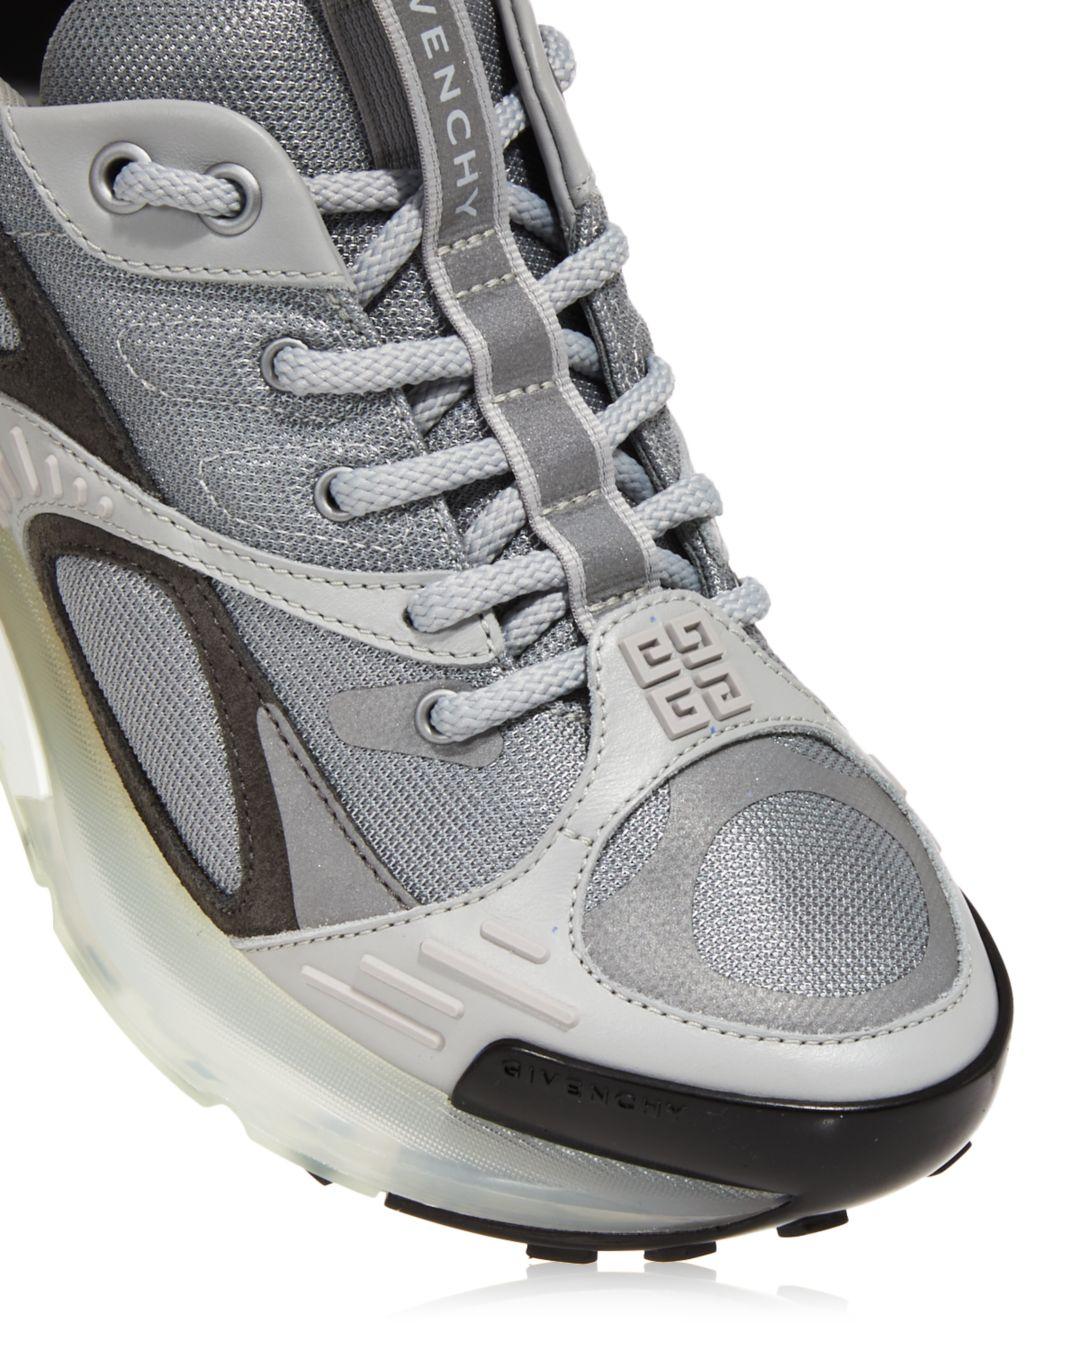 Givenchy Giv 1 Low Top Sneakers in Gray | Lyst